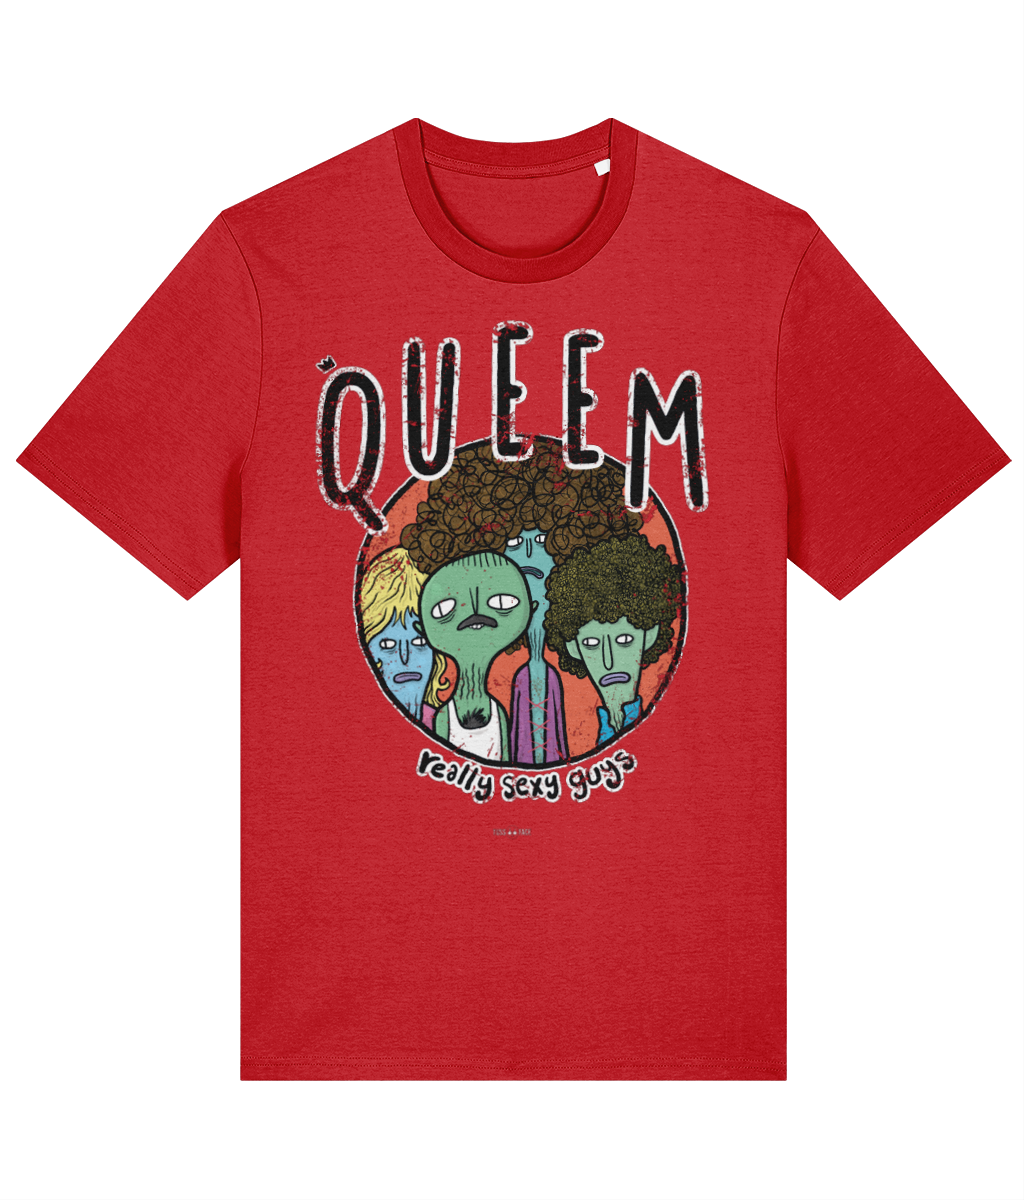 QUEEM - Really Sexy Guys - TussFace T-shirt